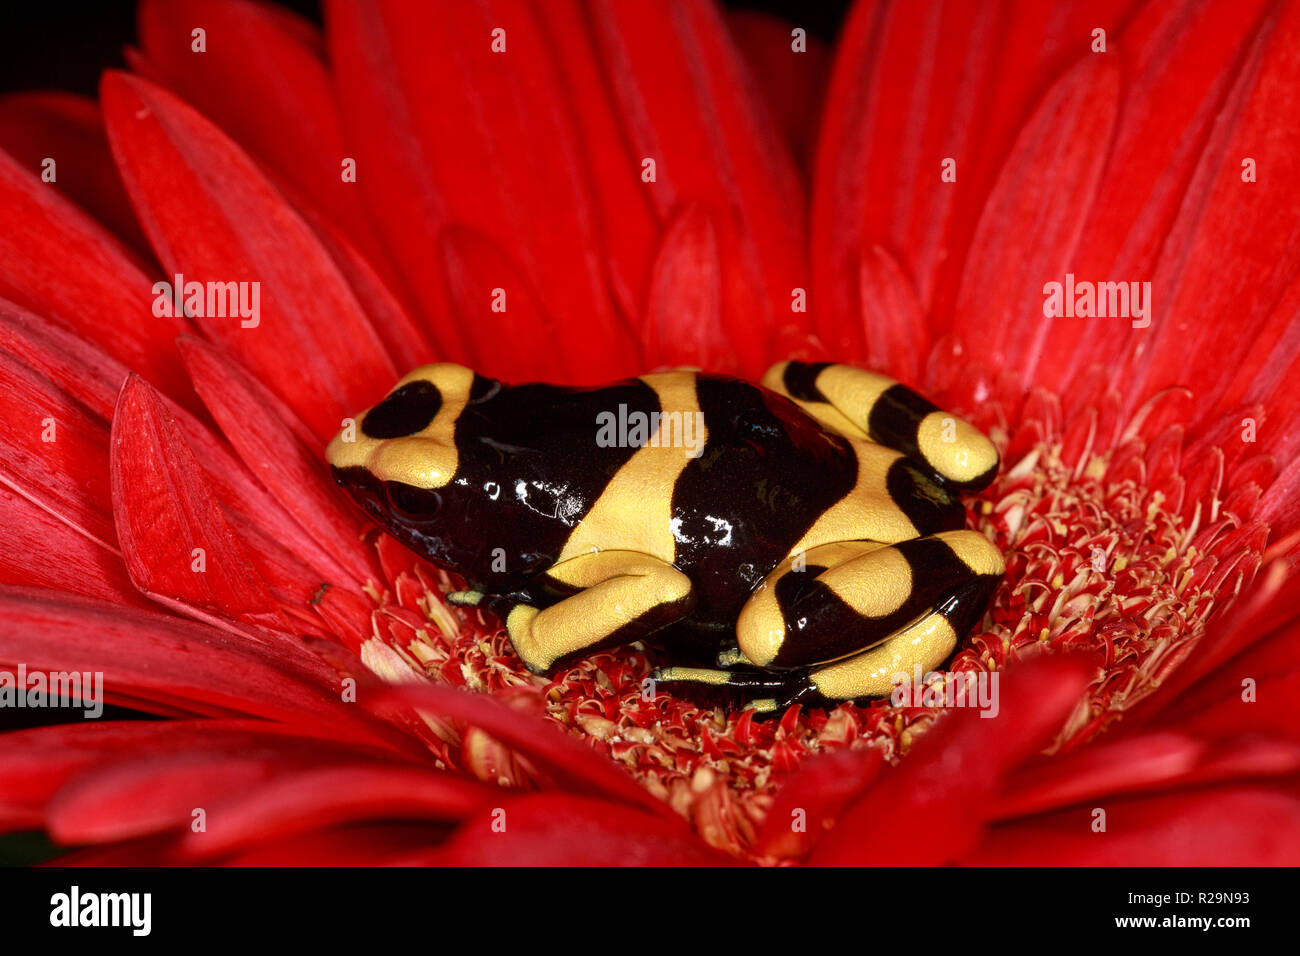 Yellow Banded Poison Frog (Dendrobates leucomelas)  on red flower (gerbera daisy) Stock Photo